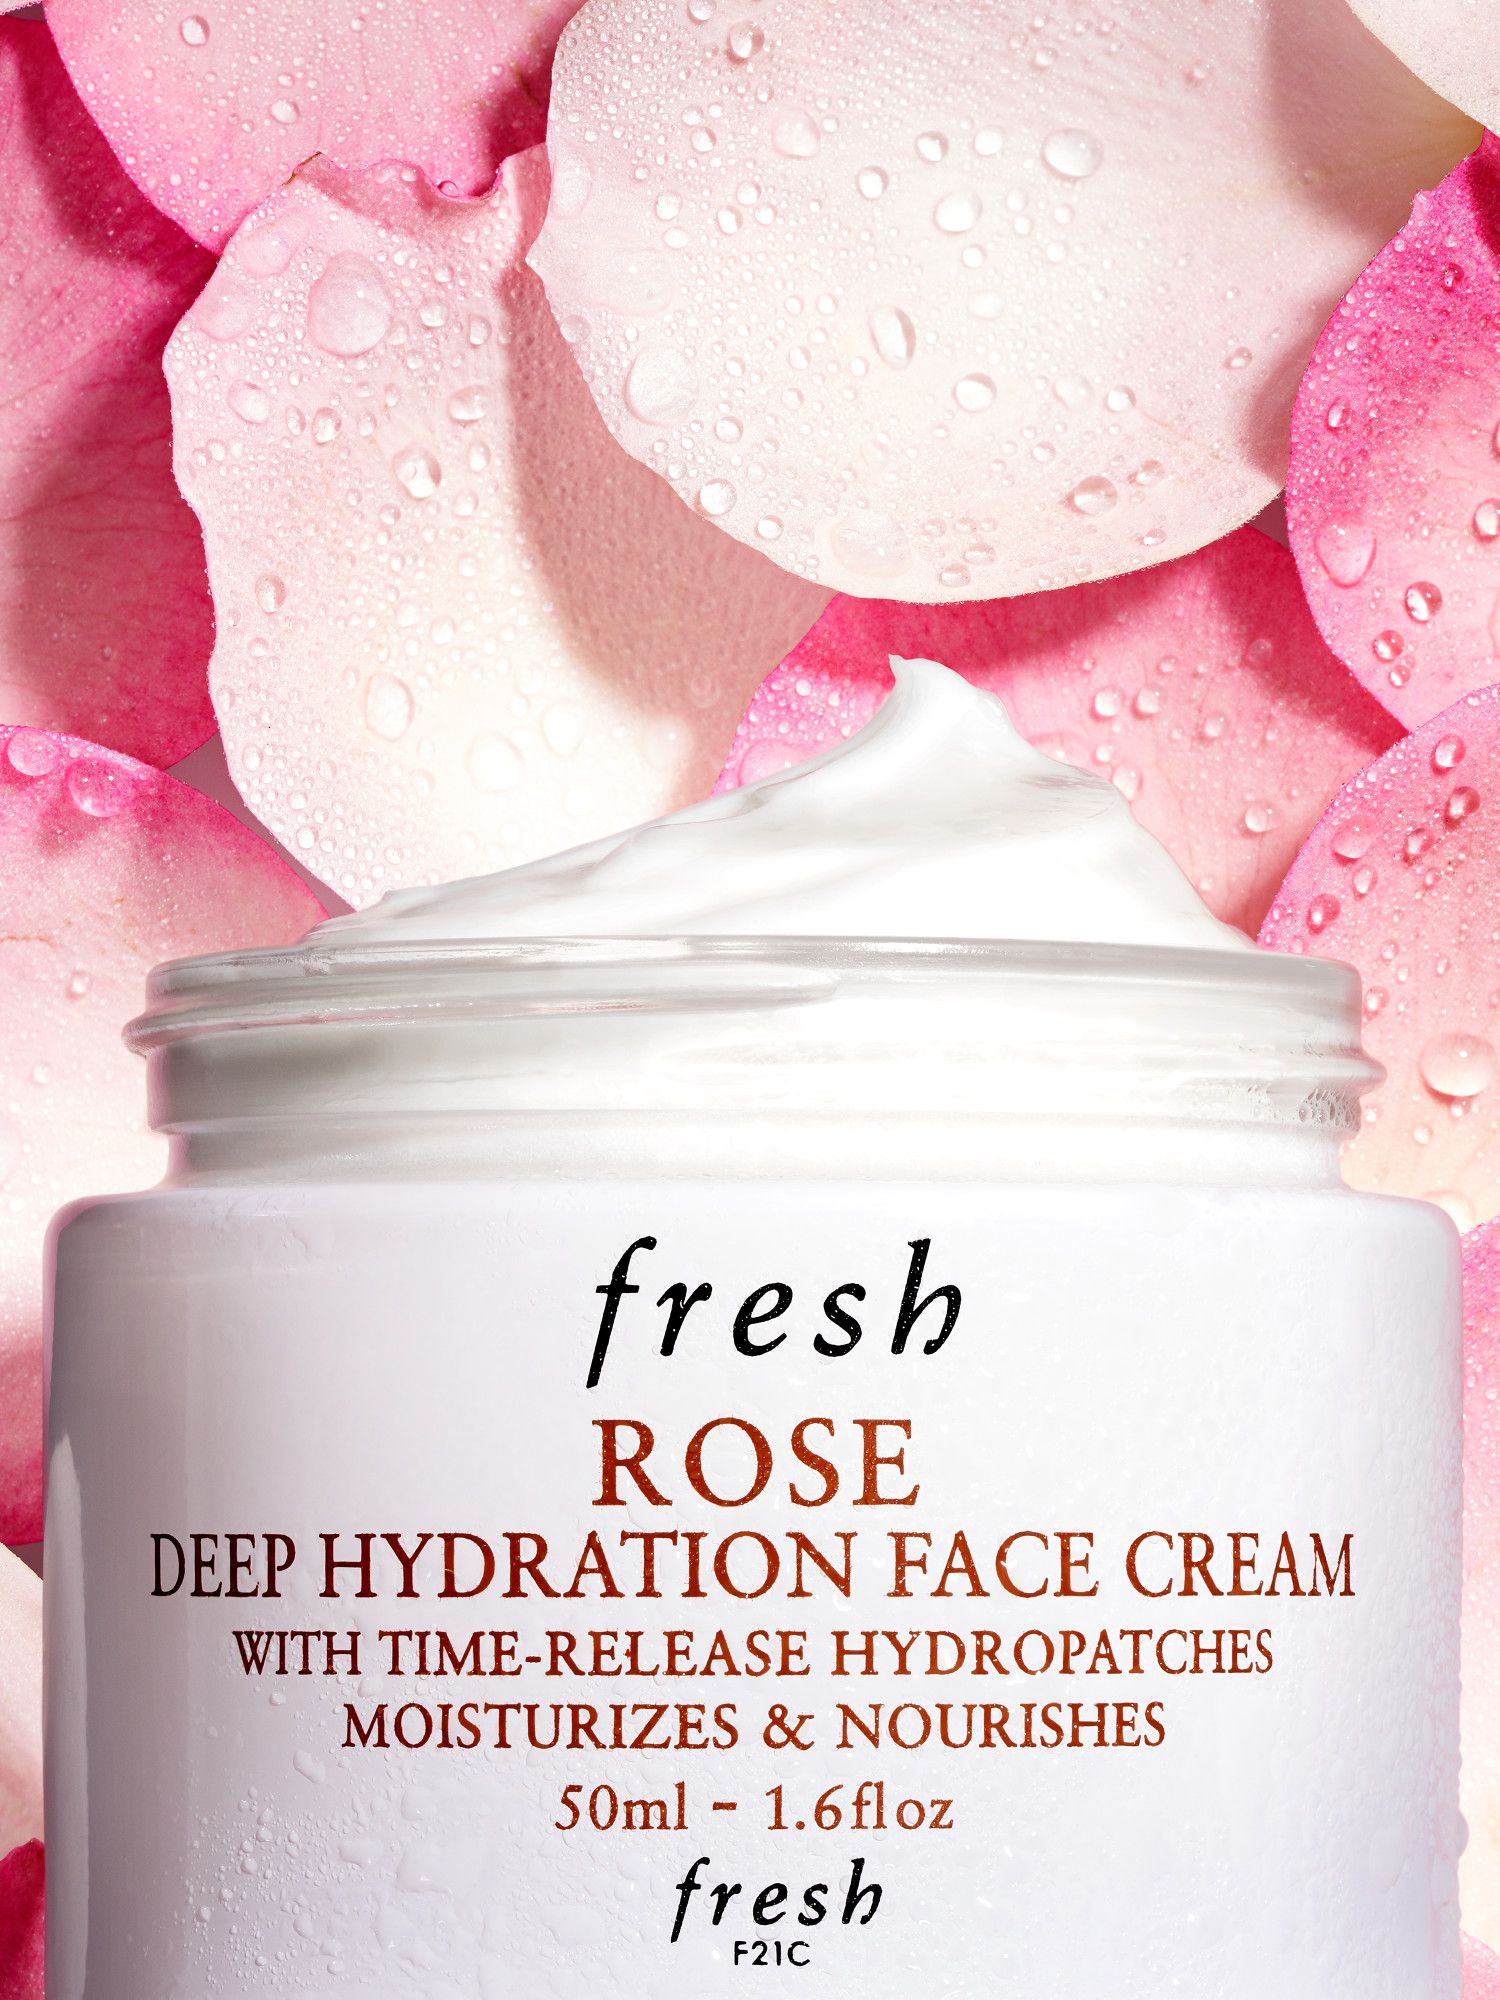 Fresh Rose Deep Hydration Face Cream 50ml At John Lewis And Partners 